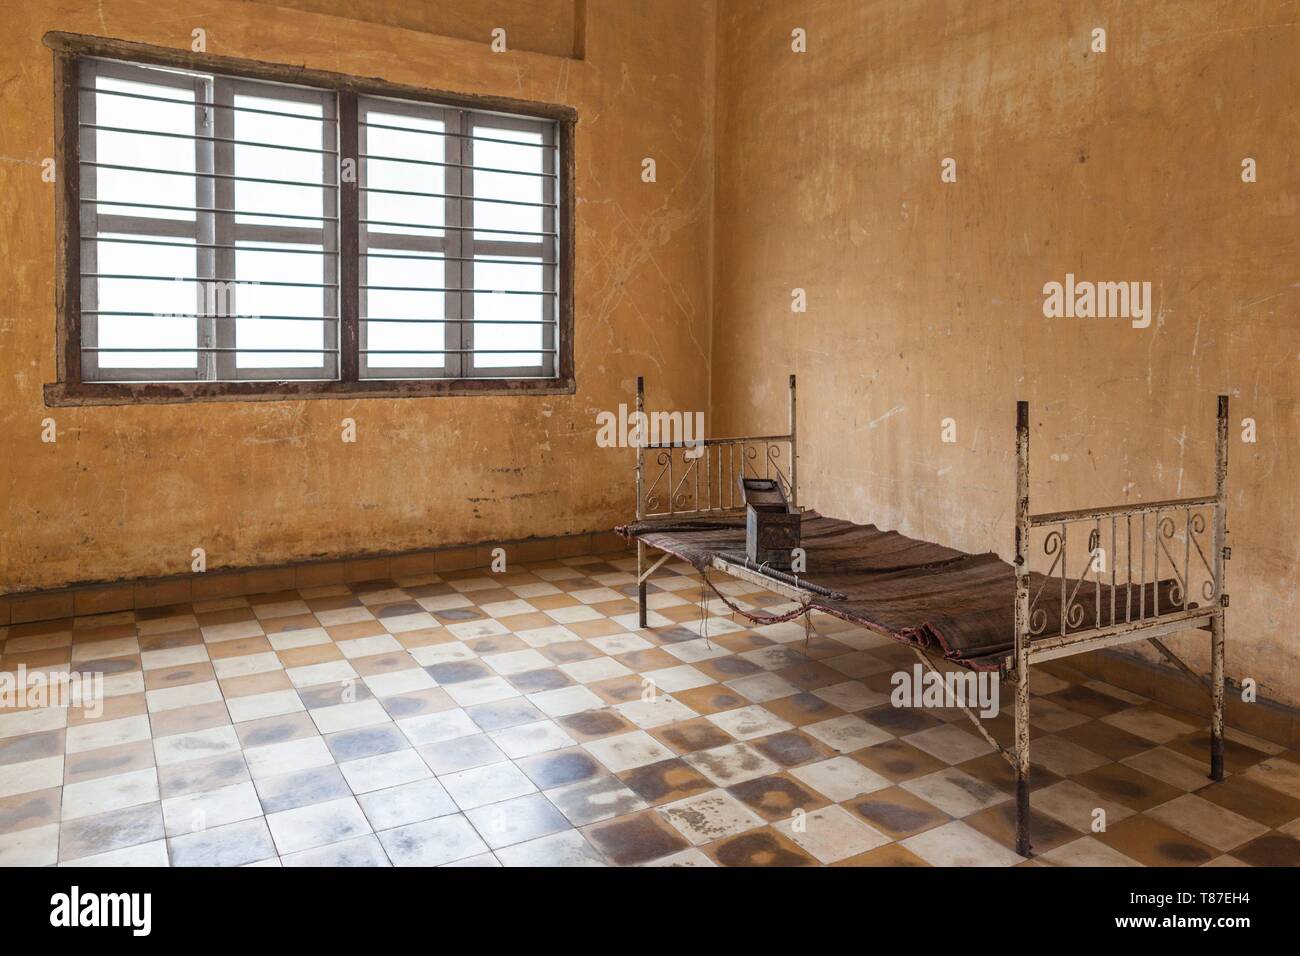 Cambodia, Phnom Penh, Tuol Sleng Museum of Genocidal Crime, Khmer Rouge prison formerly known as Prison S-21, located in old school, cell interior Stock Photo